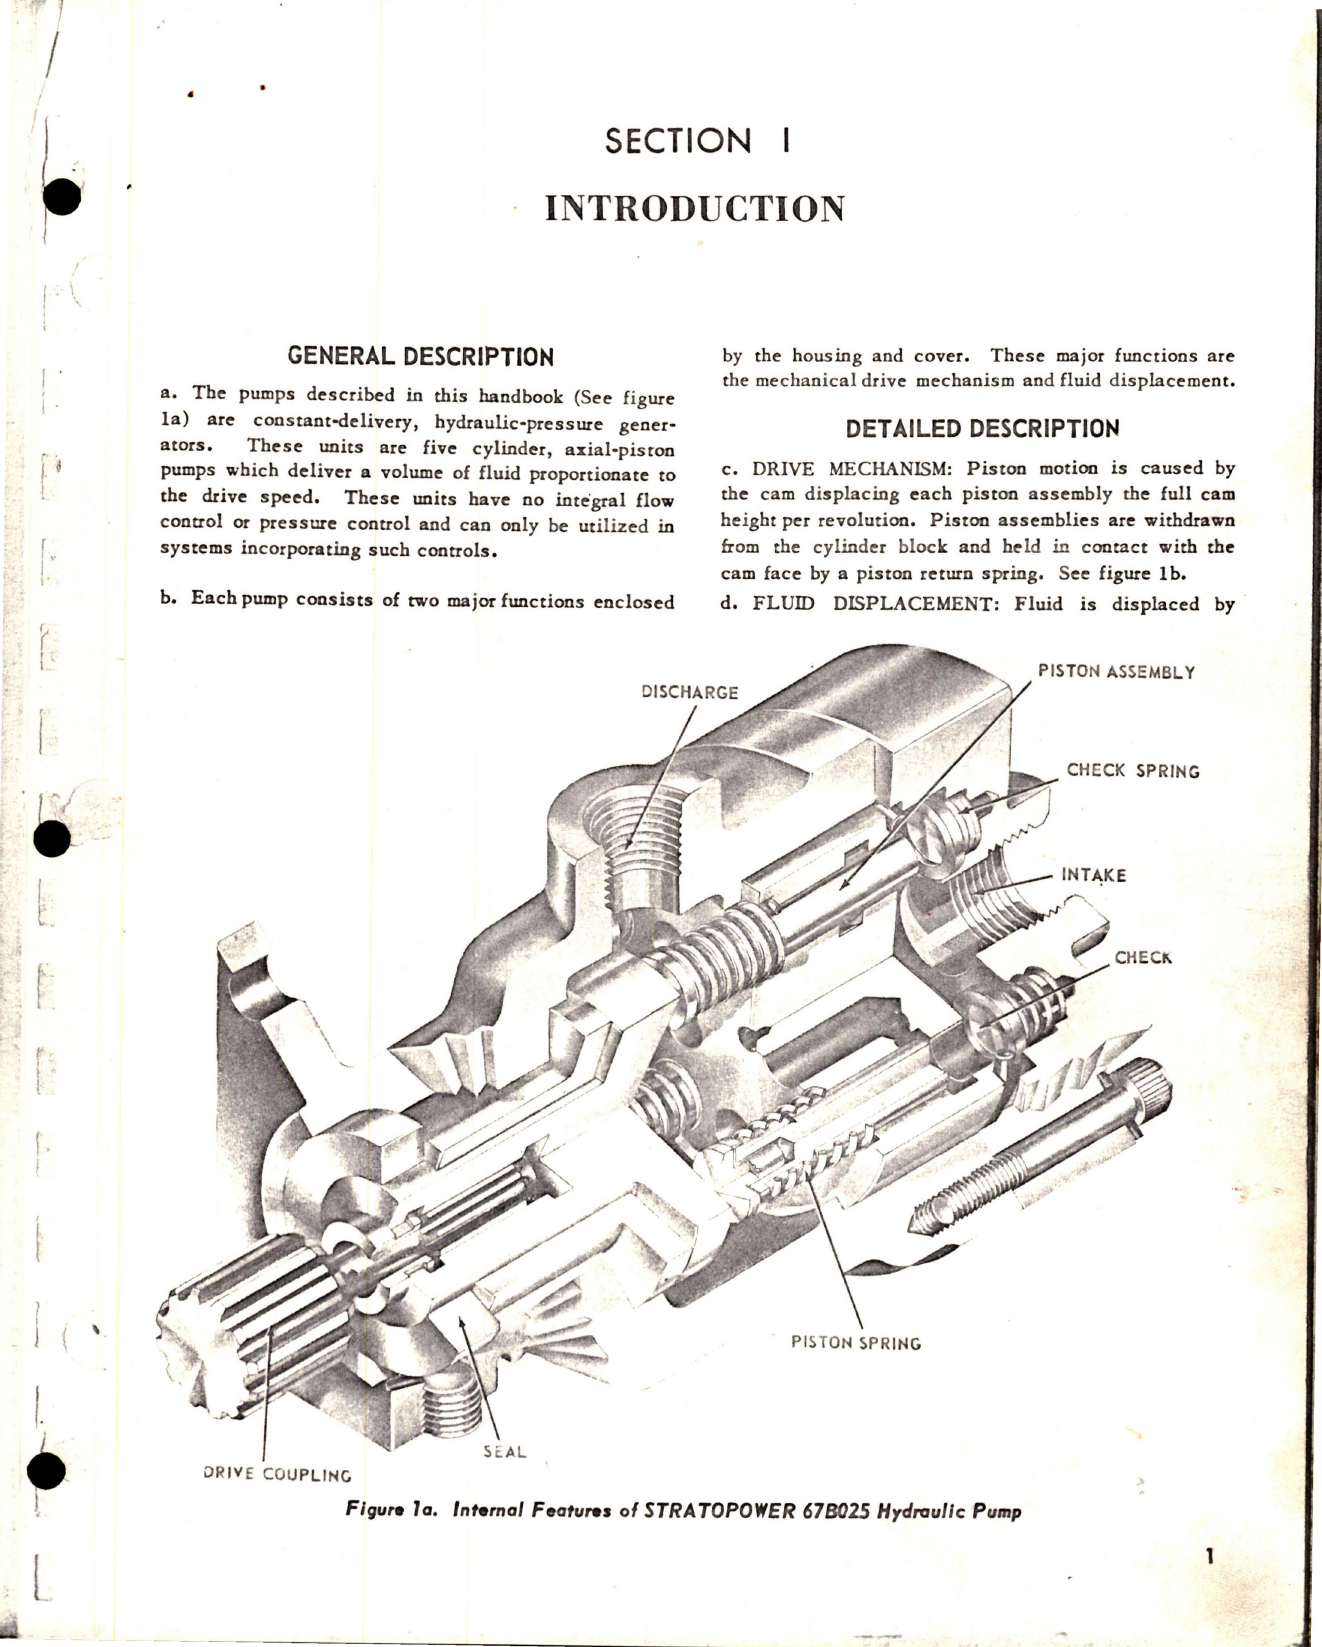 Sample page 7 from AirCorps Library document: Overhaul and Maintenance for Stratopower Aircraft Hydraulics - 67 Constant Series 